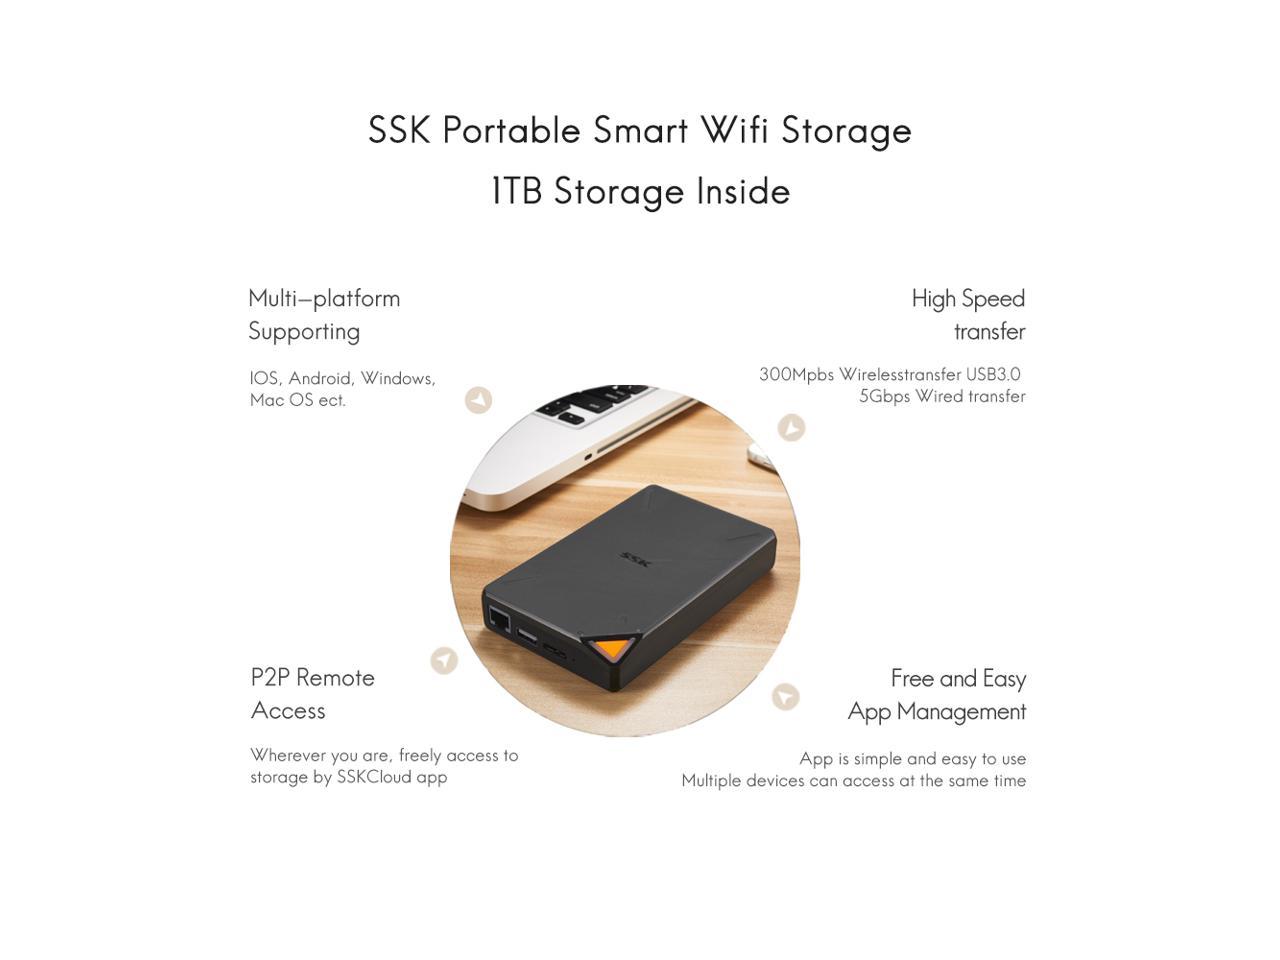 Bundles SSK 4TB Personal Cloud Network Attached Storage Support Auto-Backup,Home Office Storage NAS and SSK 2TB Portable NAS External Wireless Hard Drive with Own Wi-Fi Hotspot 